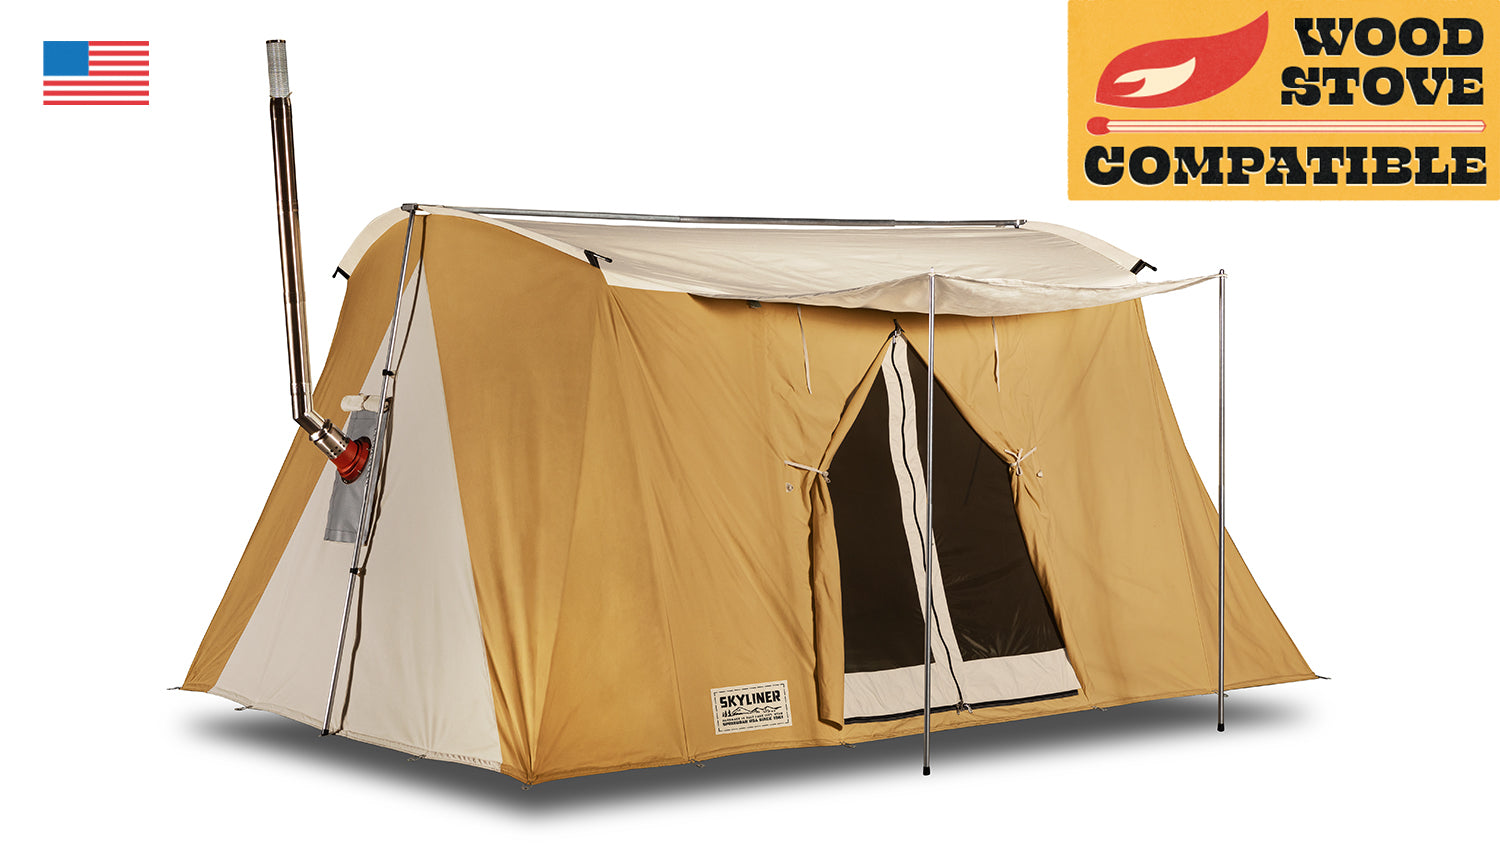 Lighting up your Wall Tent: Make the most of your camping trip